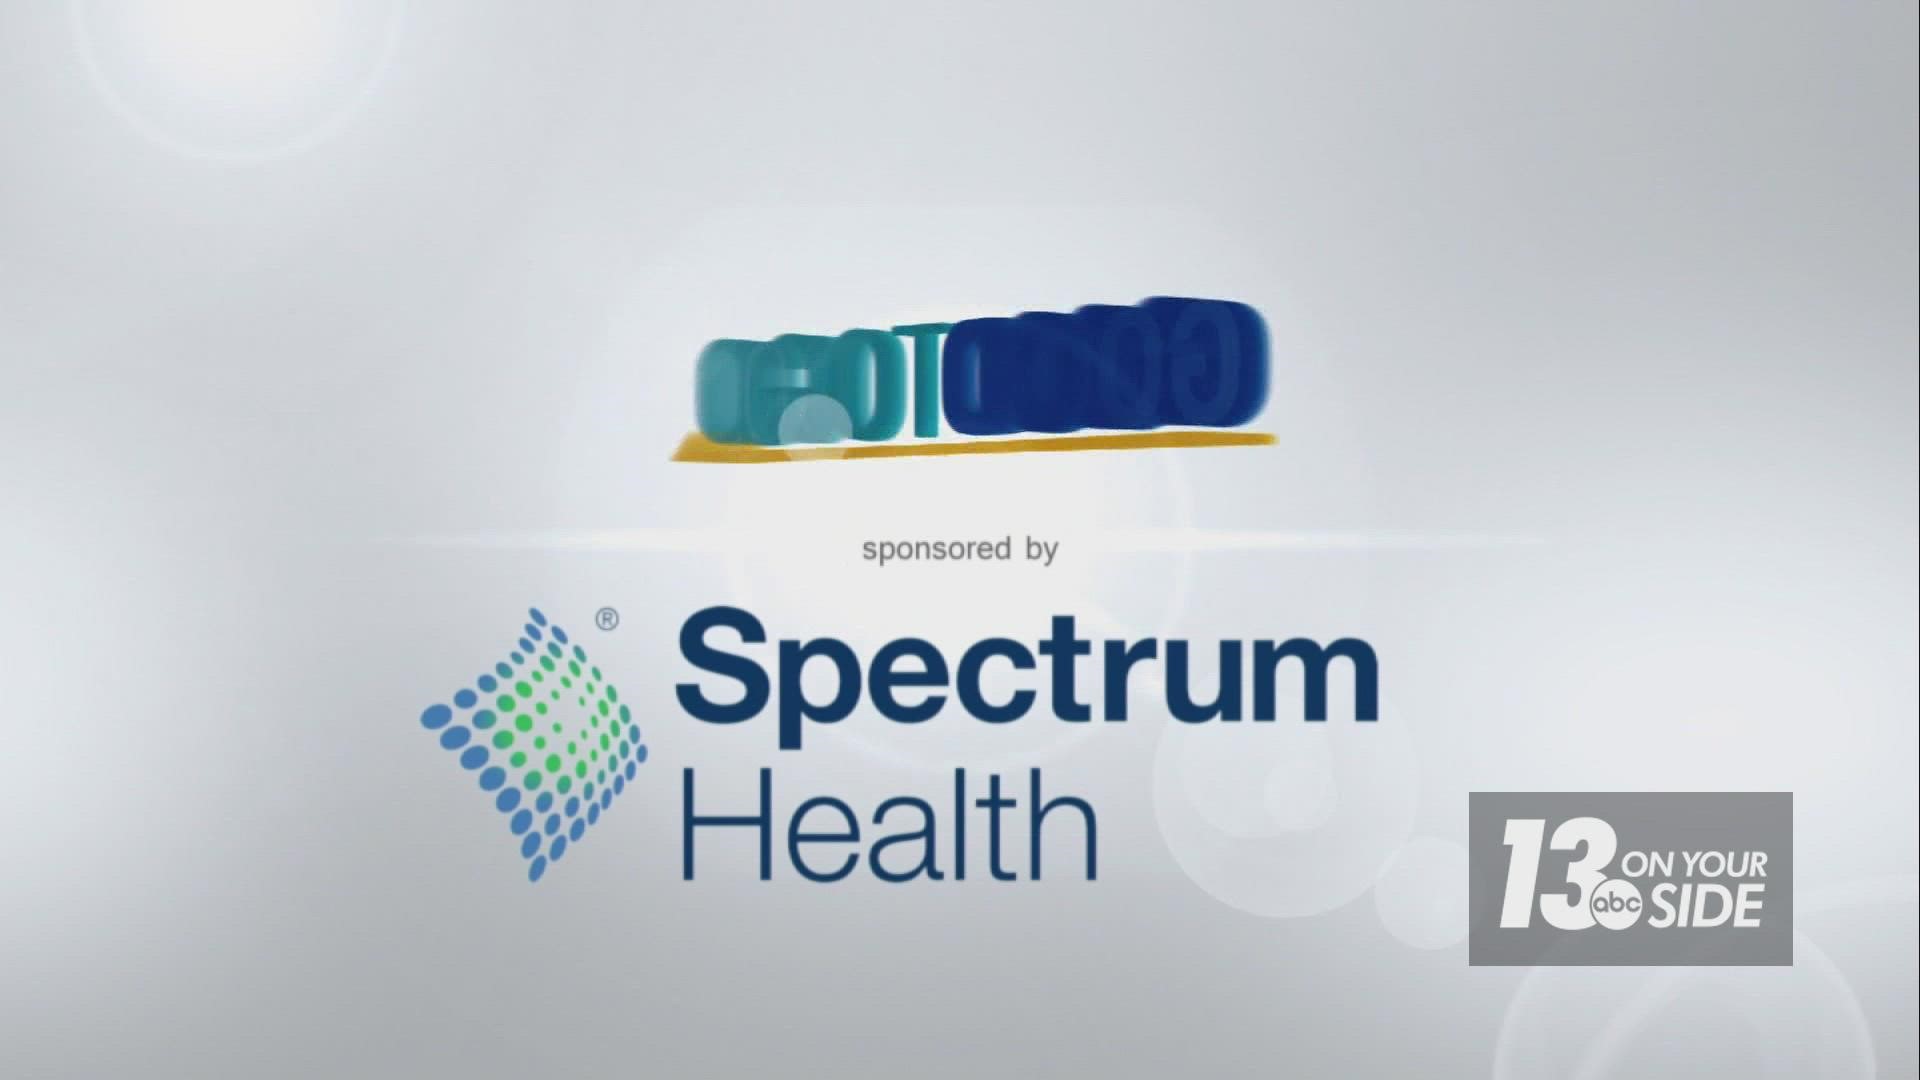 Spectrum Health’s Spine and Pain Management team is expanding to the lakeshore to provide personalized care based on each patient’s unique health journey.